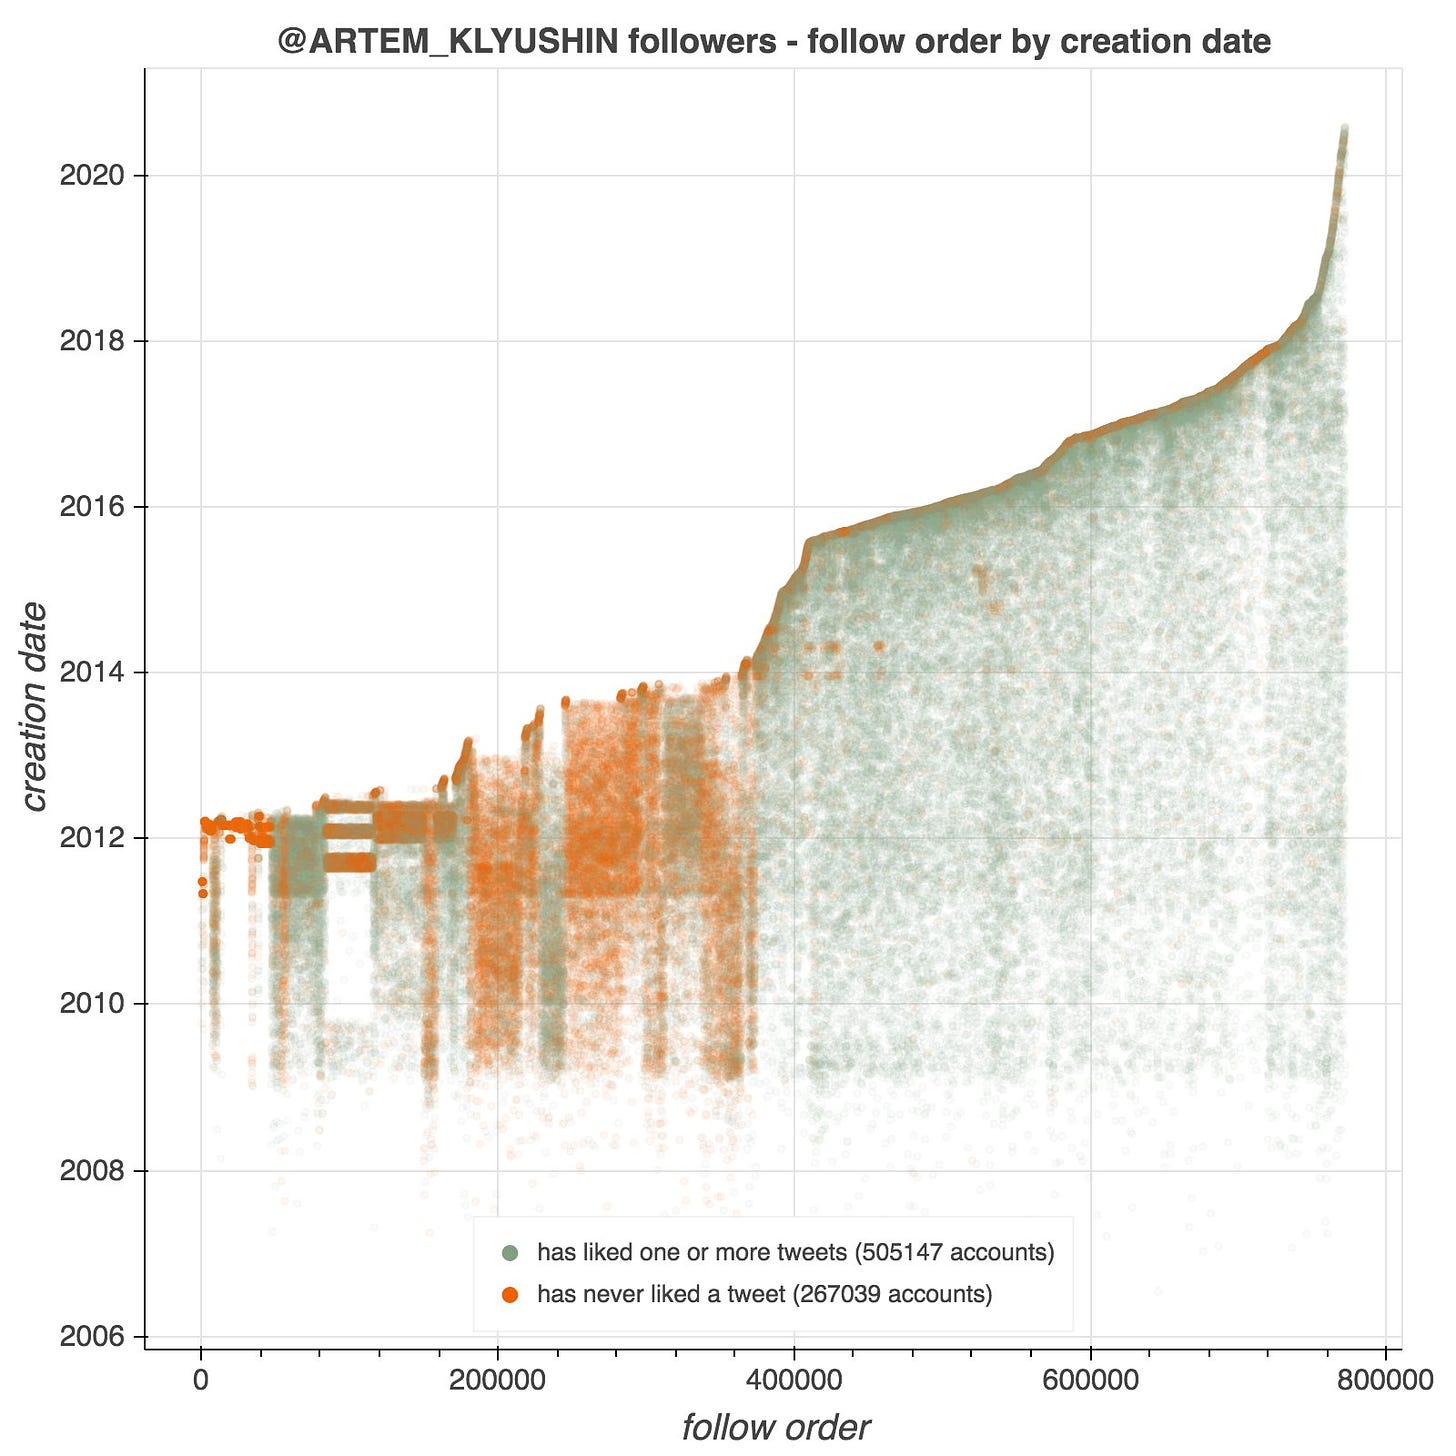 follow order by creation date plot for @ARTEM_KLYUSHIN, showing a variety of interesting anomalies